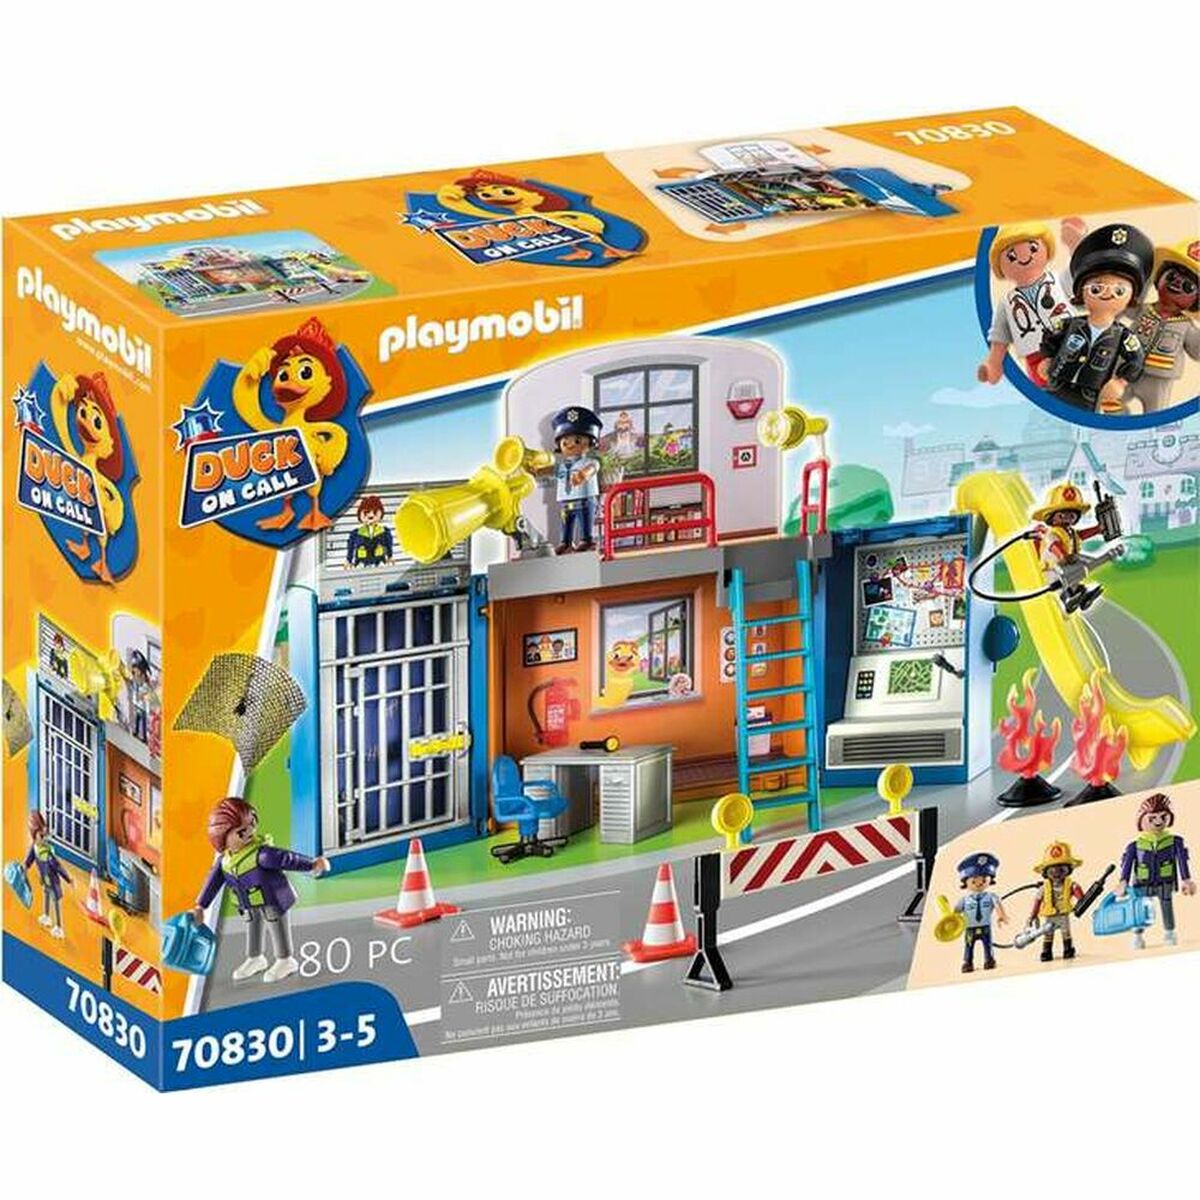 Playset Playmobil Duck on Call Police Officer Base station 70830 (70